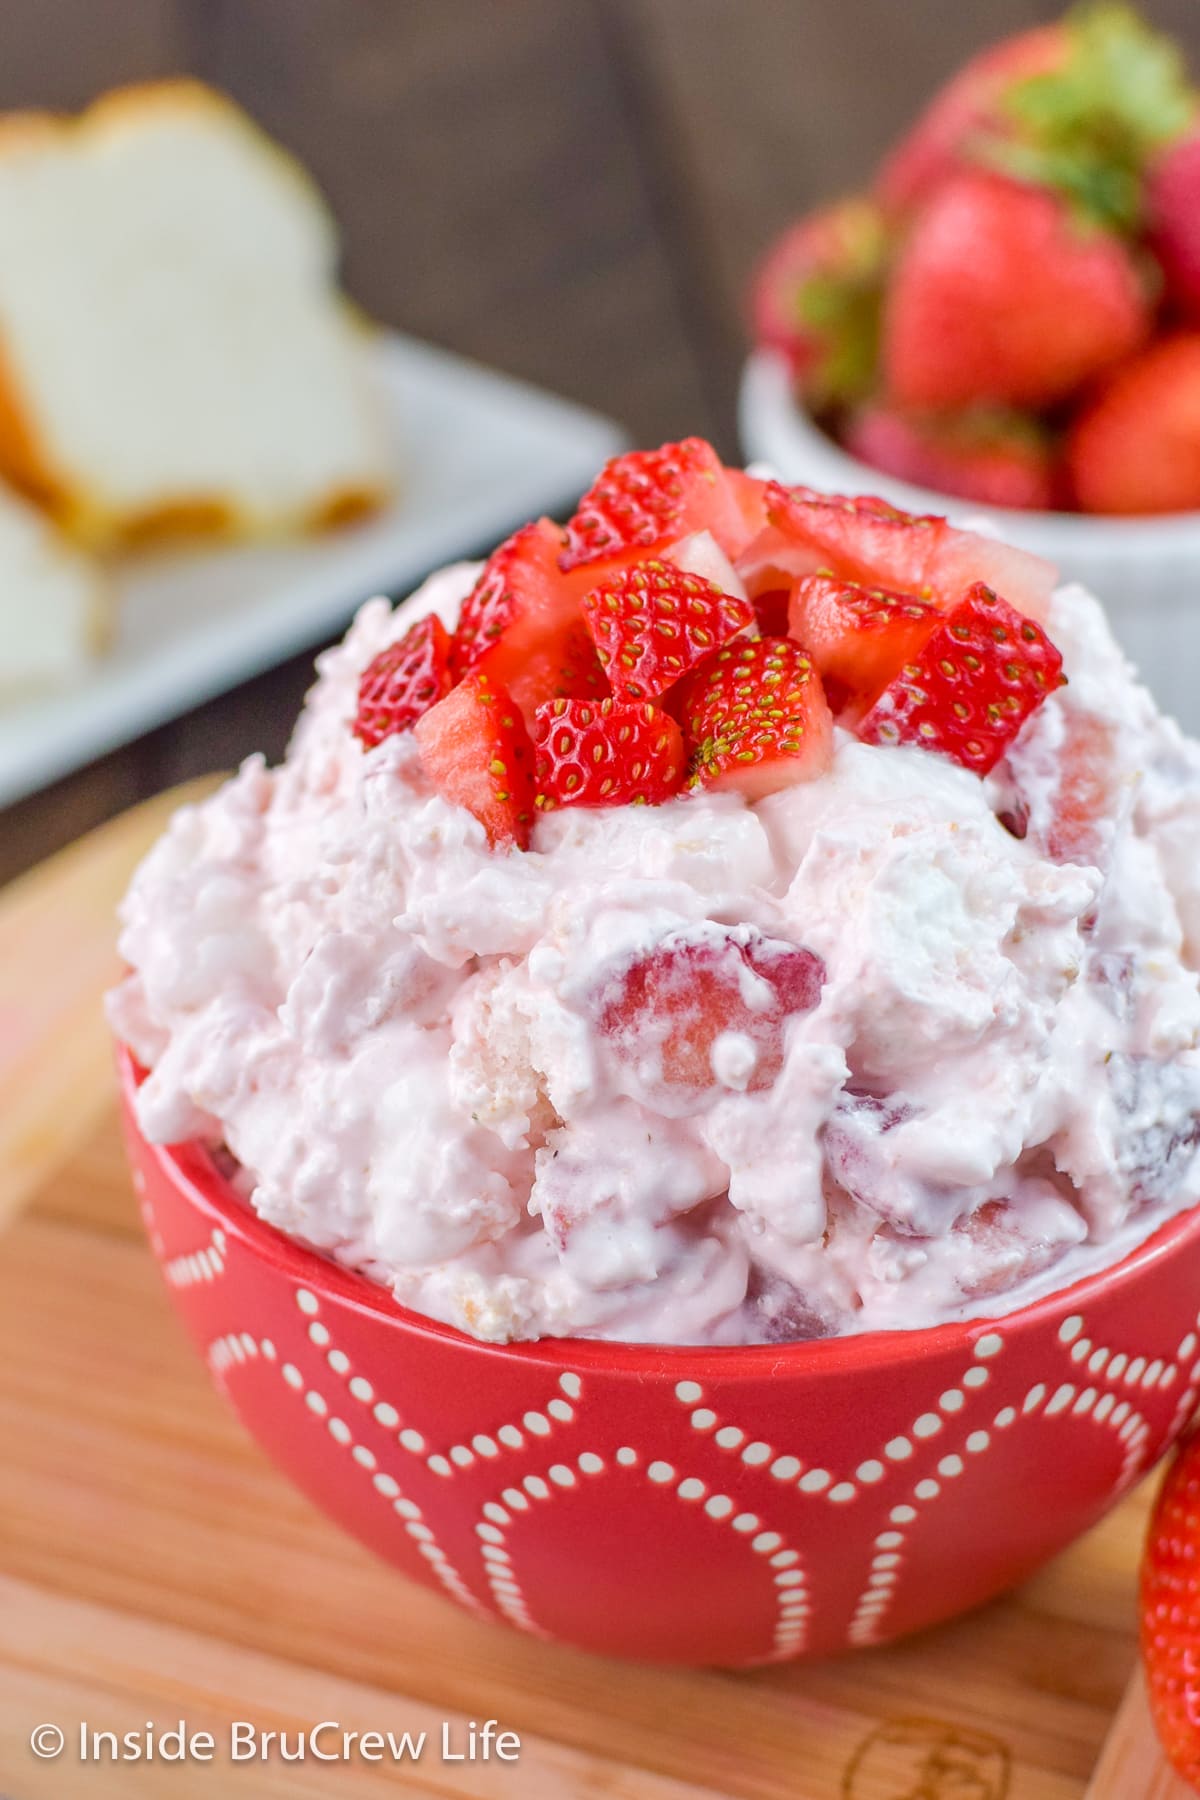 A red bowl filled with pink dessert salad and topped with fresh strawberries.